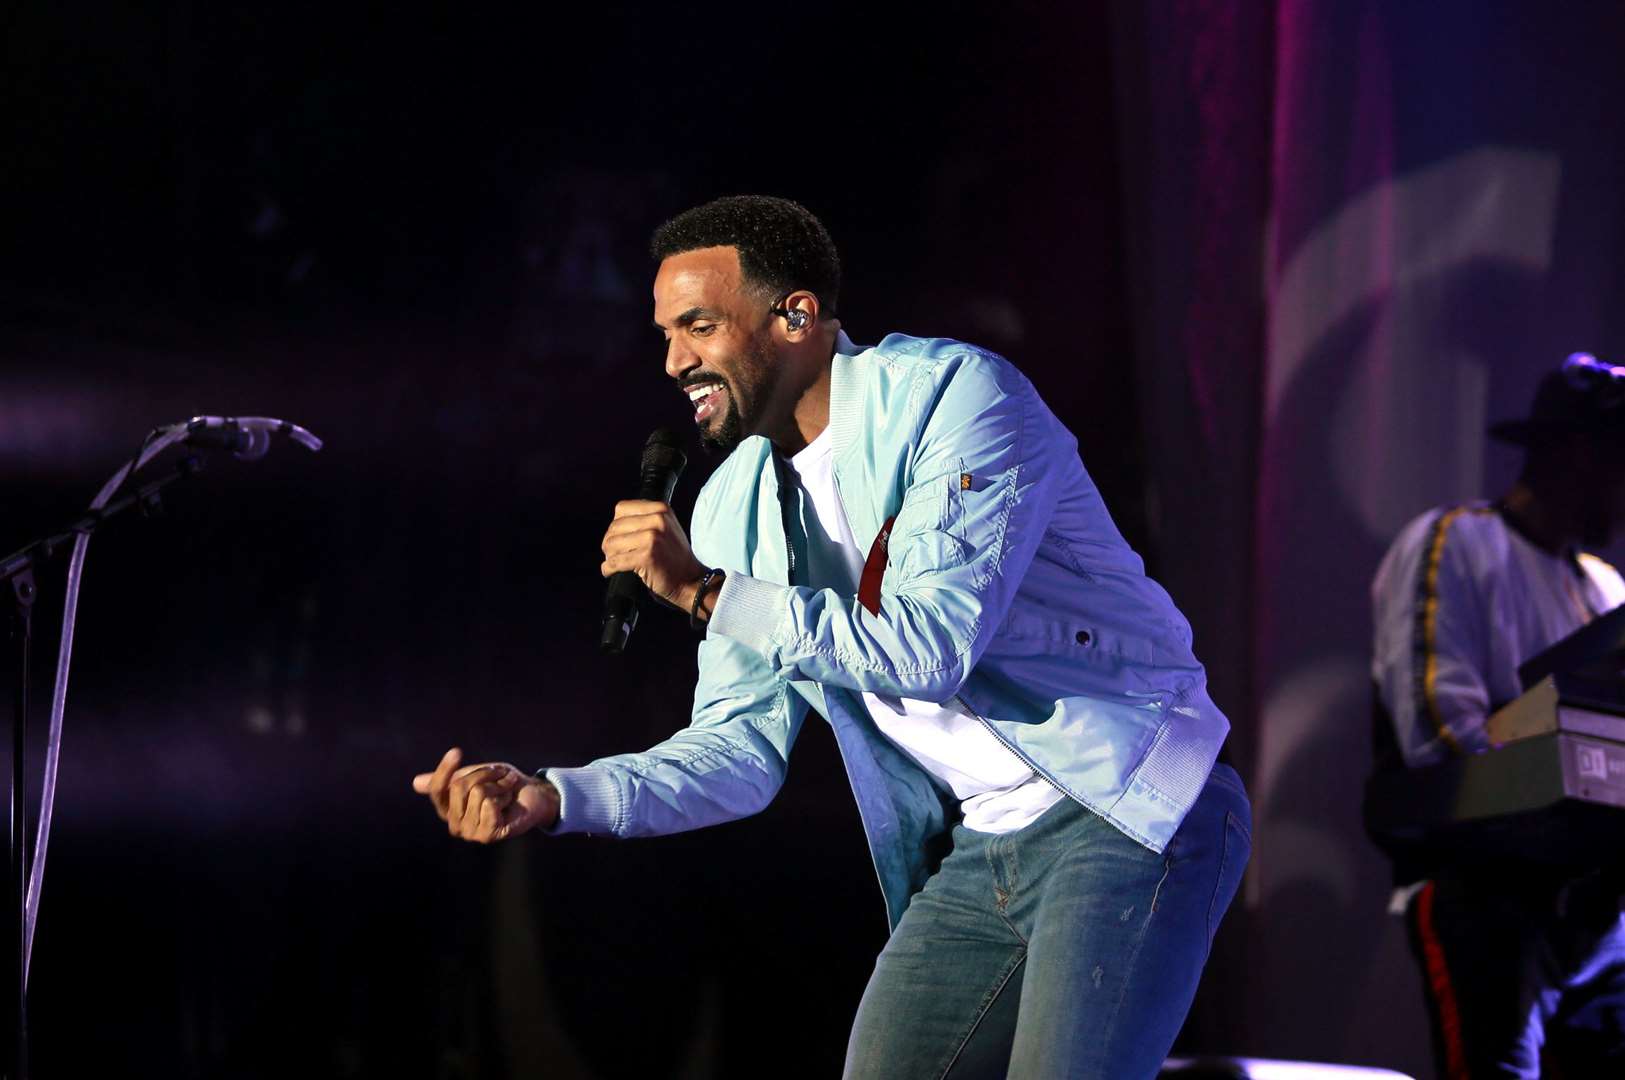 Craig David will take to the stage at Pub in the Park this summer